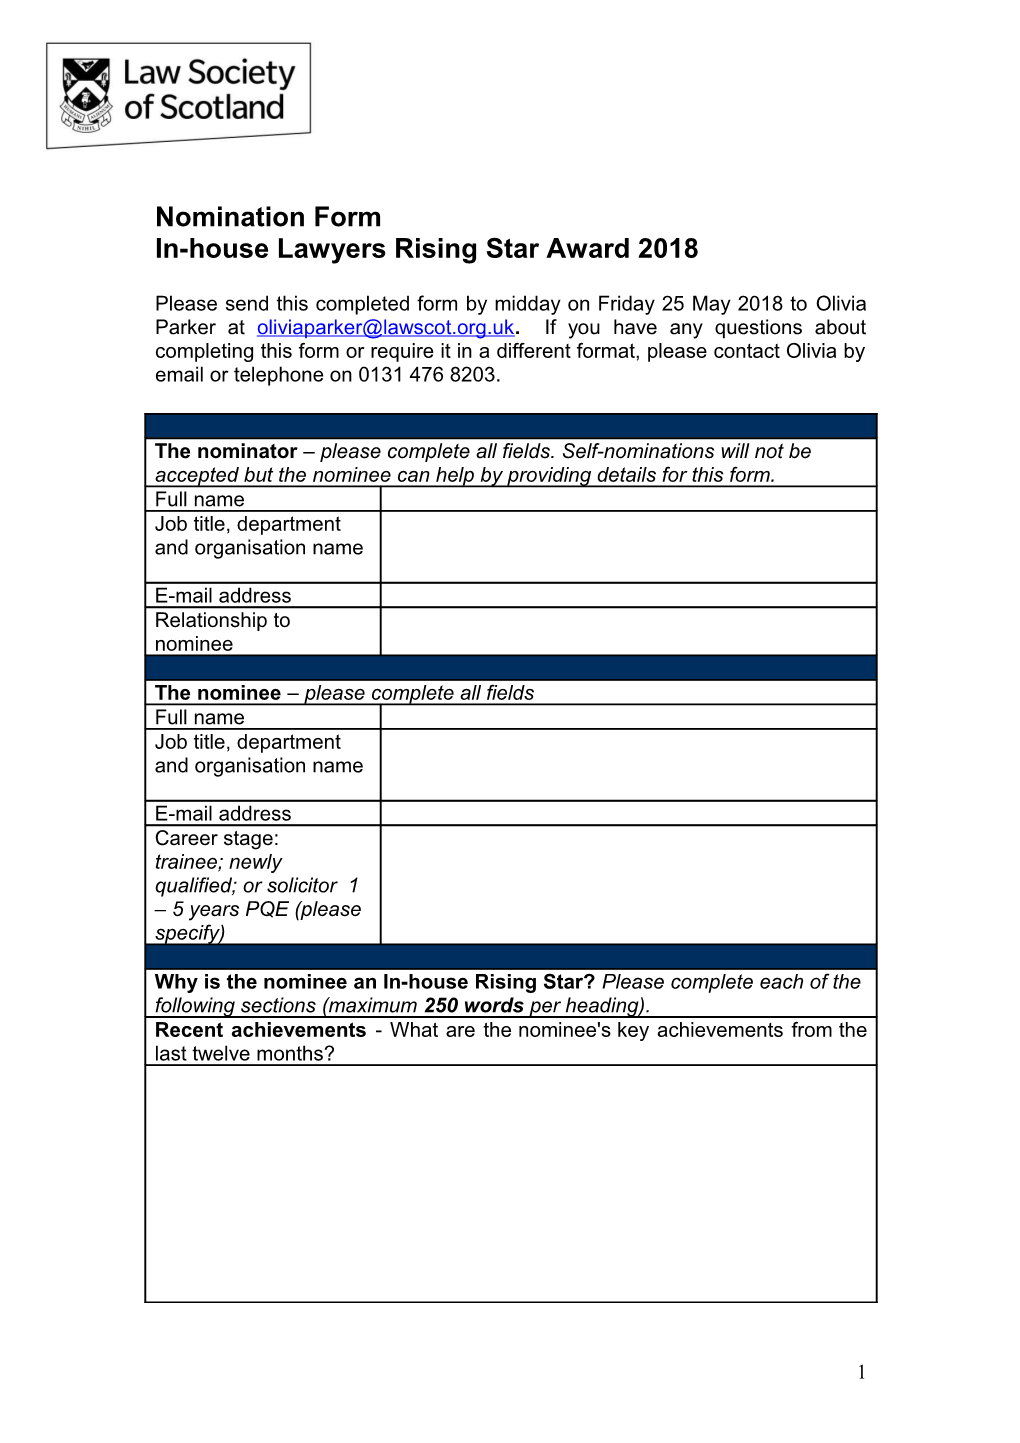 In-House Lawyers Rising Star Award 2018